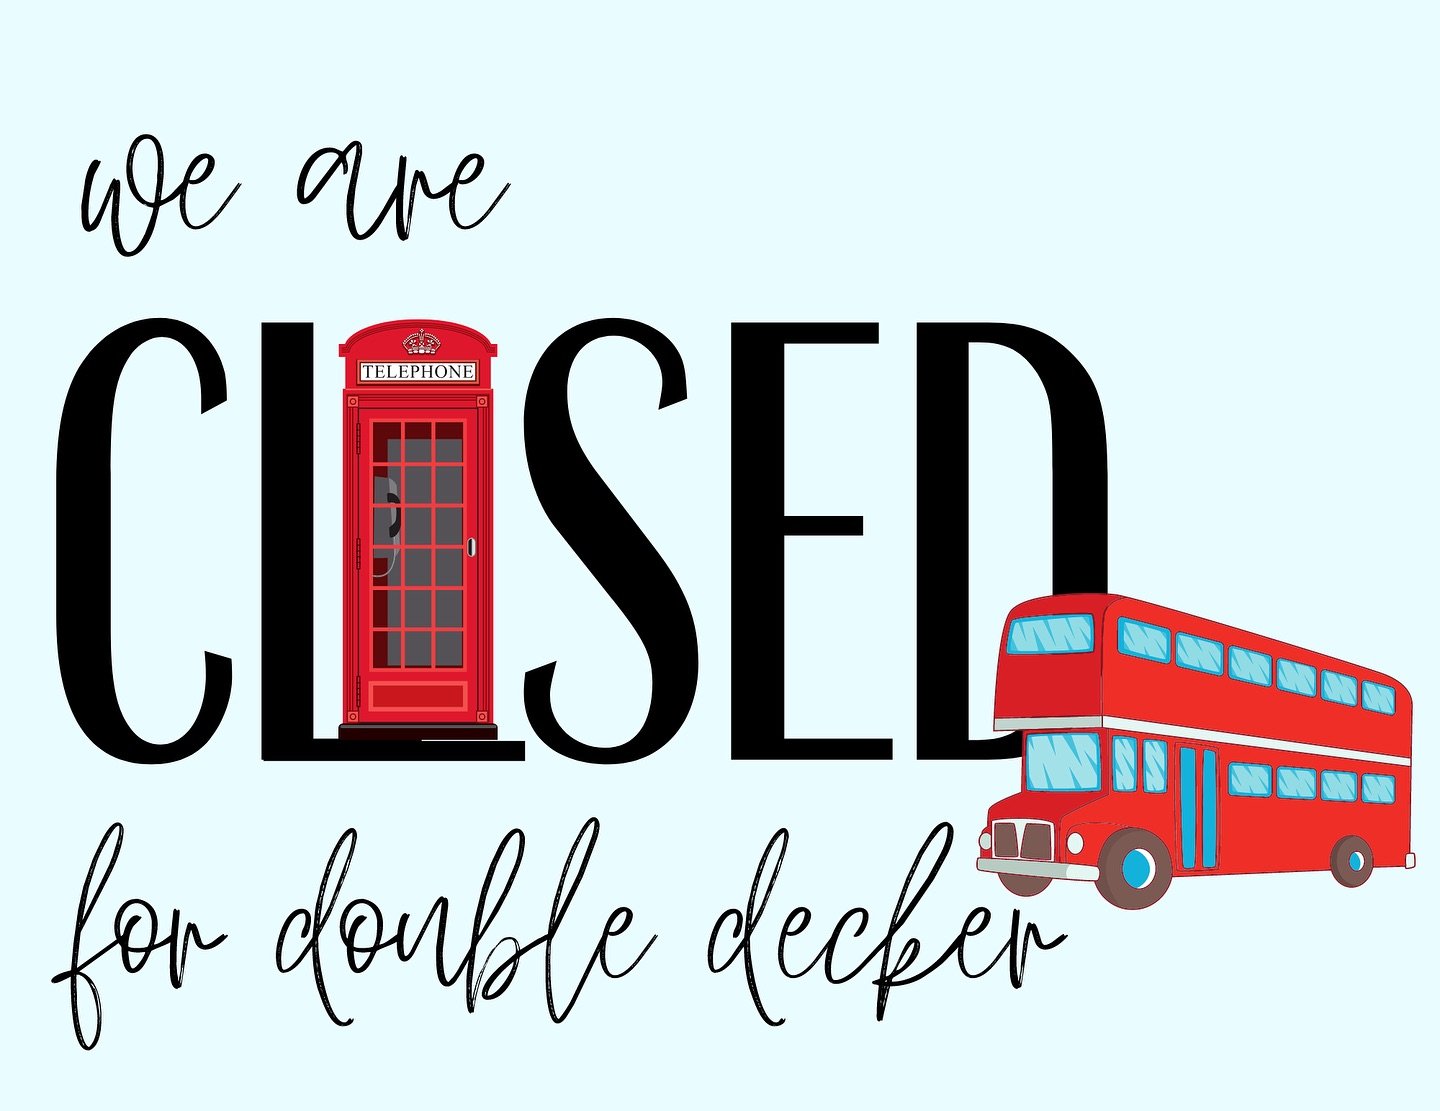 2020 Lux Spa is closed today!!! We encourage everyone to attend double decker and support small/ local businesses!! 

We will return any messages on Monday!! Have a great weekend!